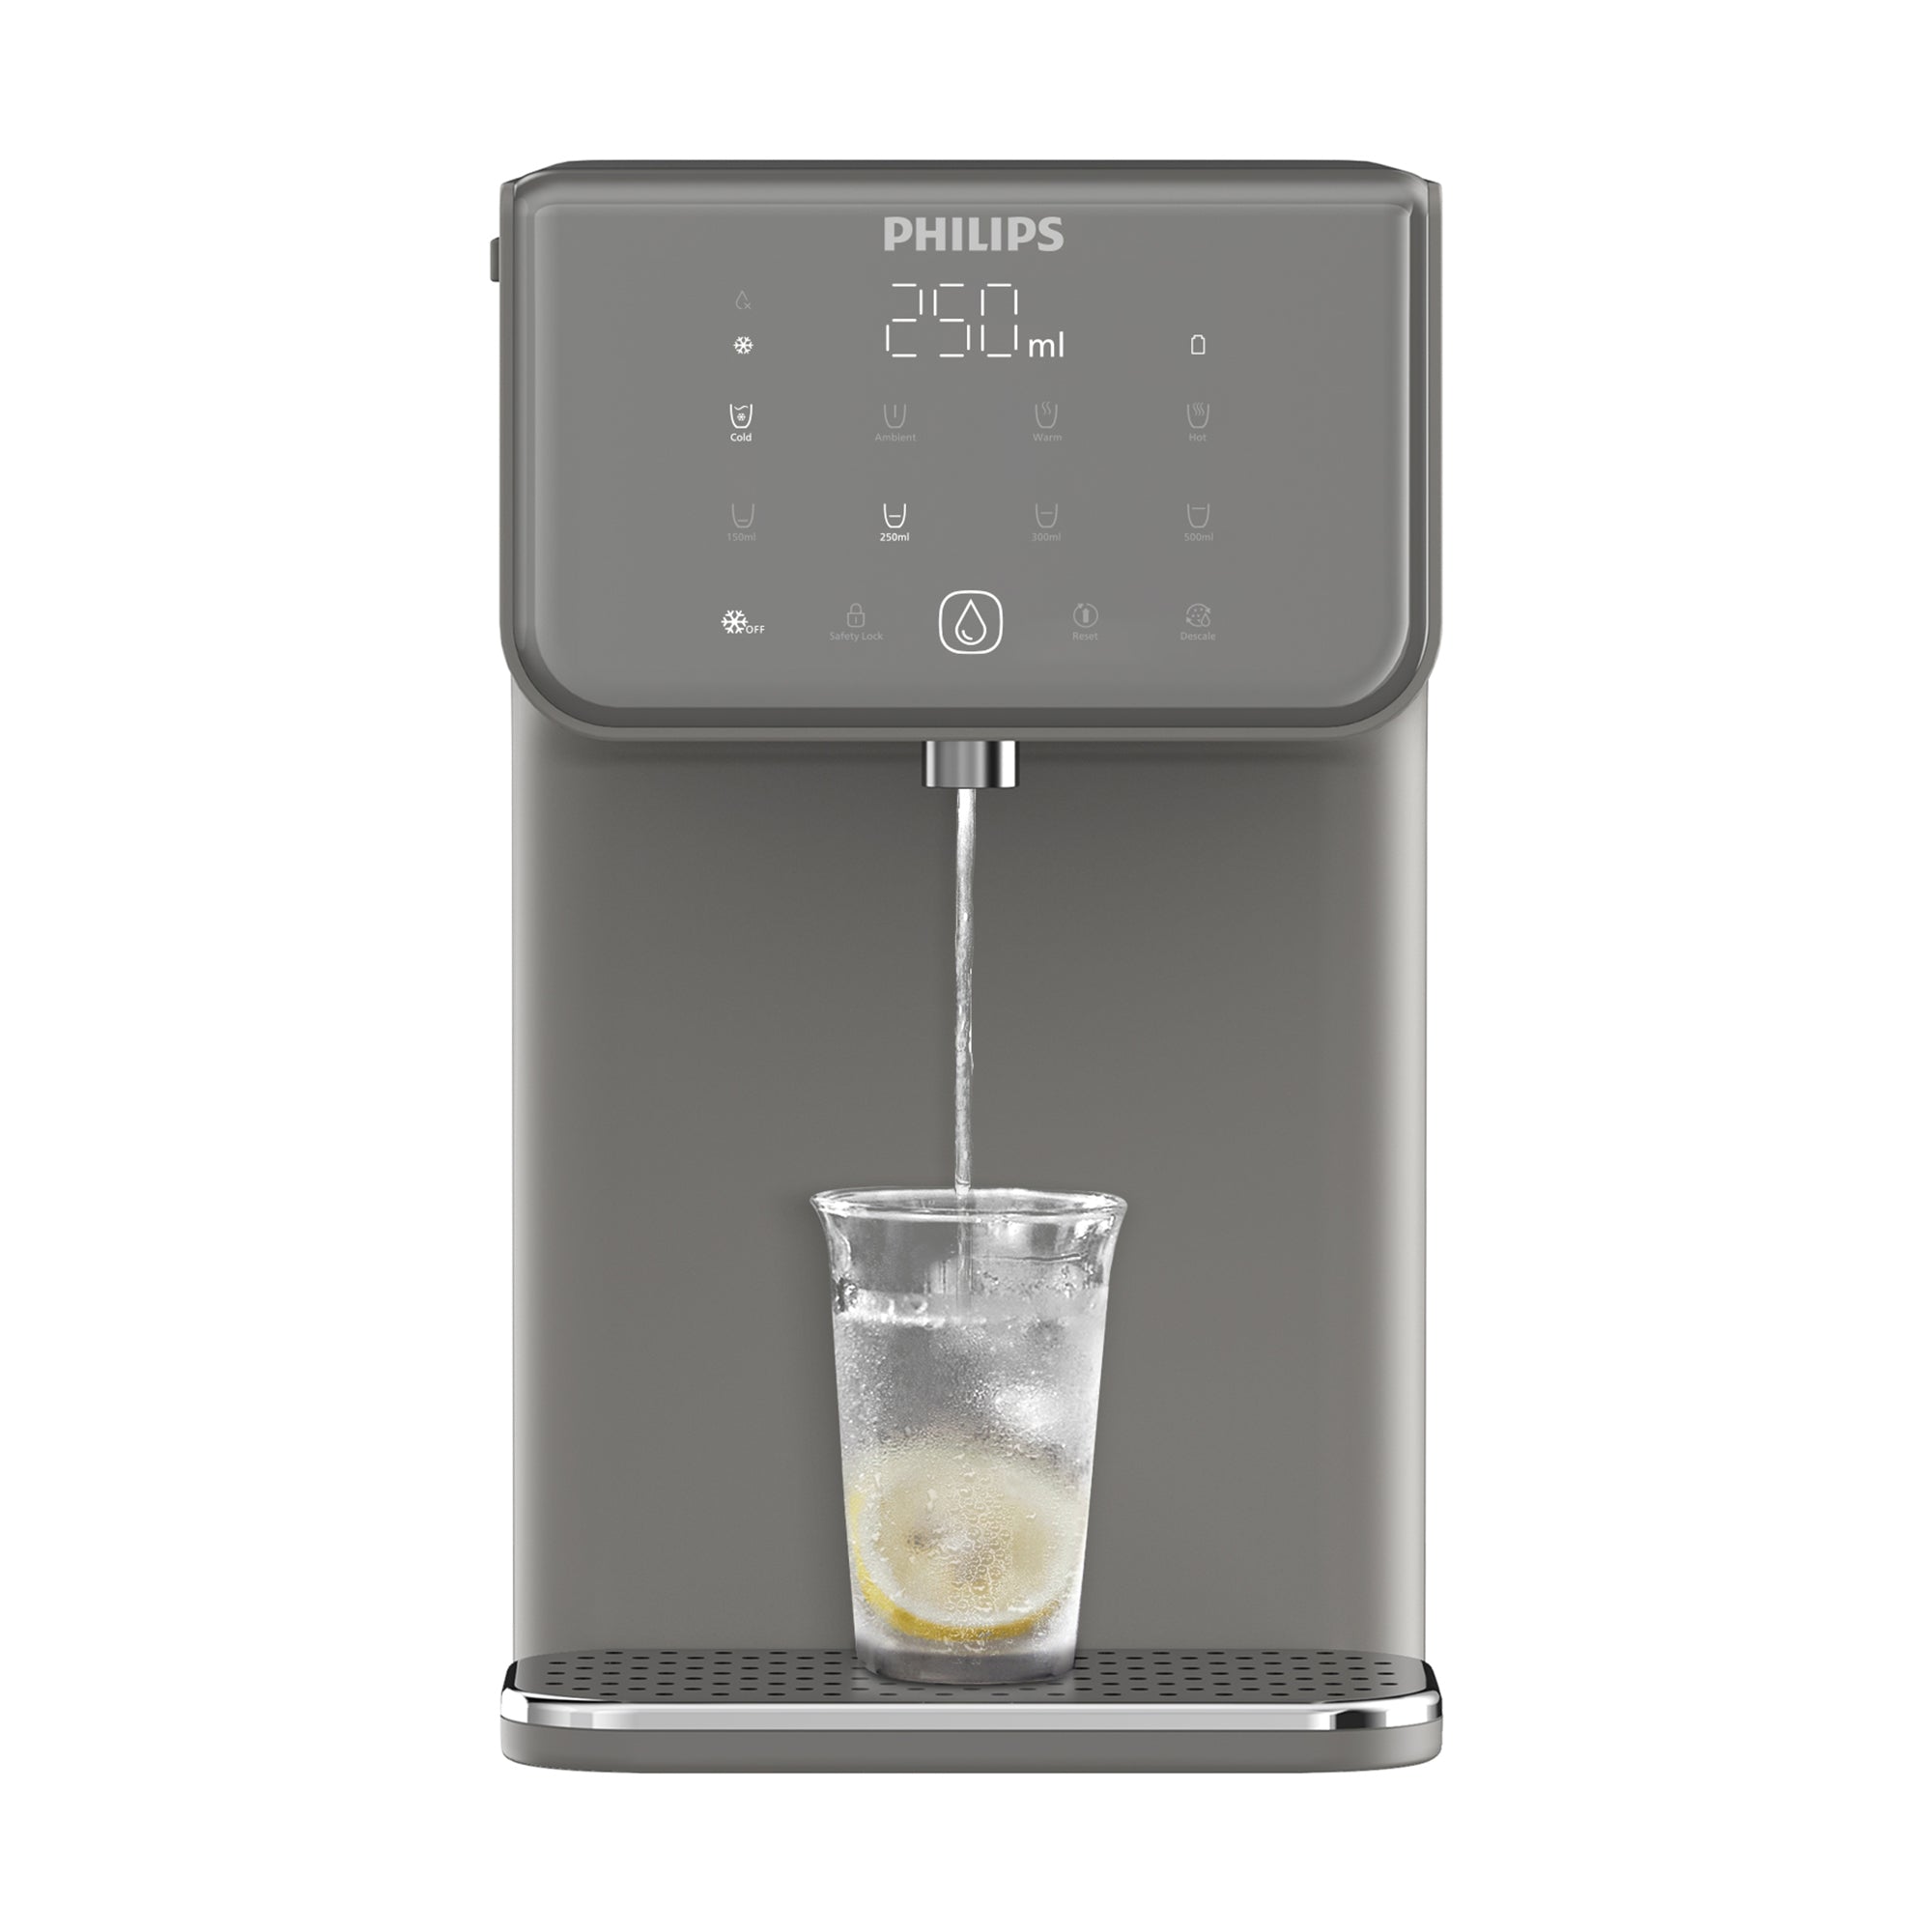 Philips Compact Water Station, Hot & Cold ADD5981GR/79 with Micro X-Clean filtration